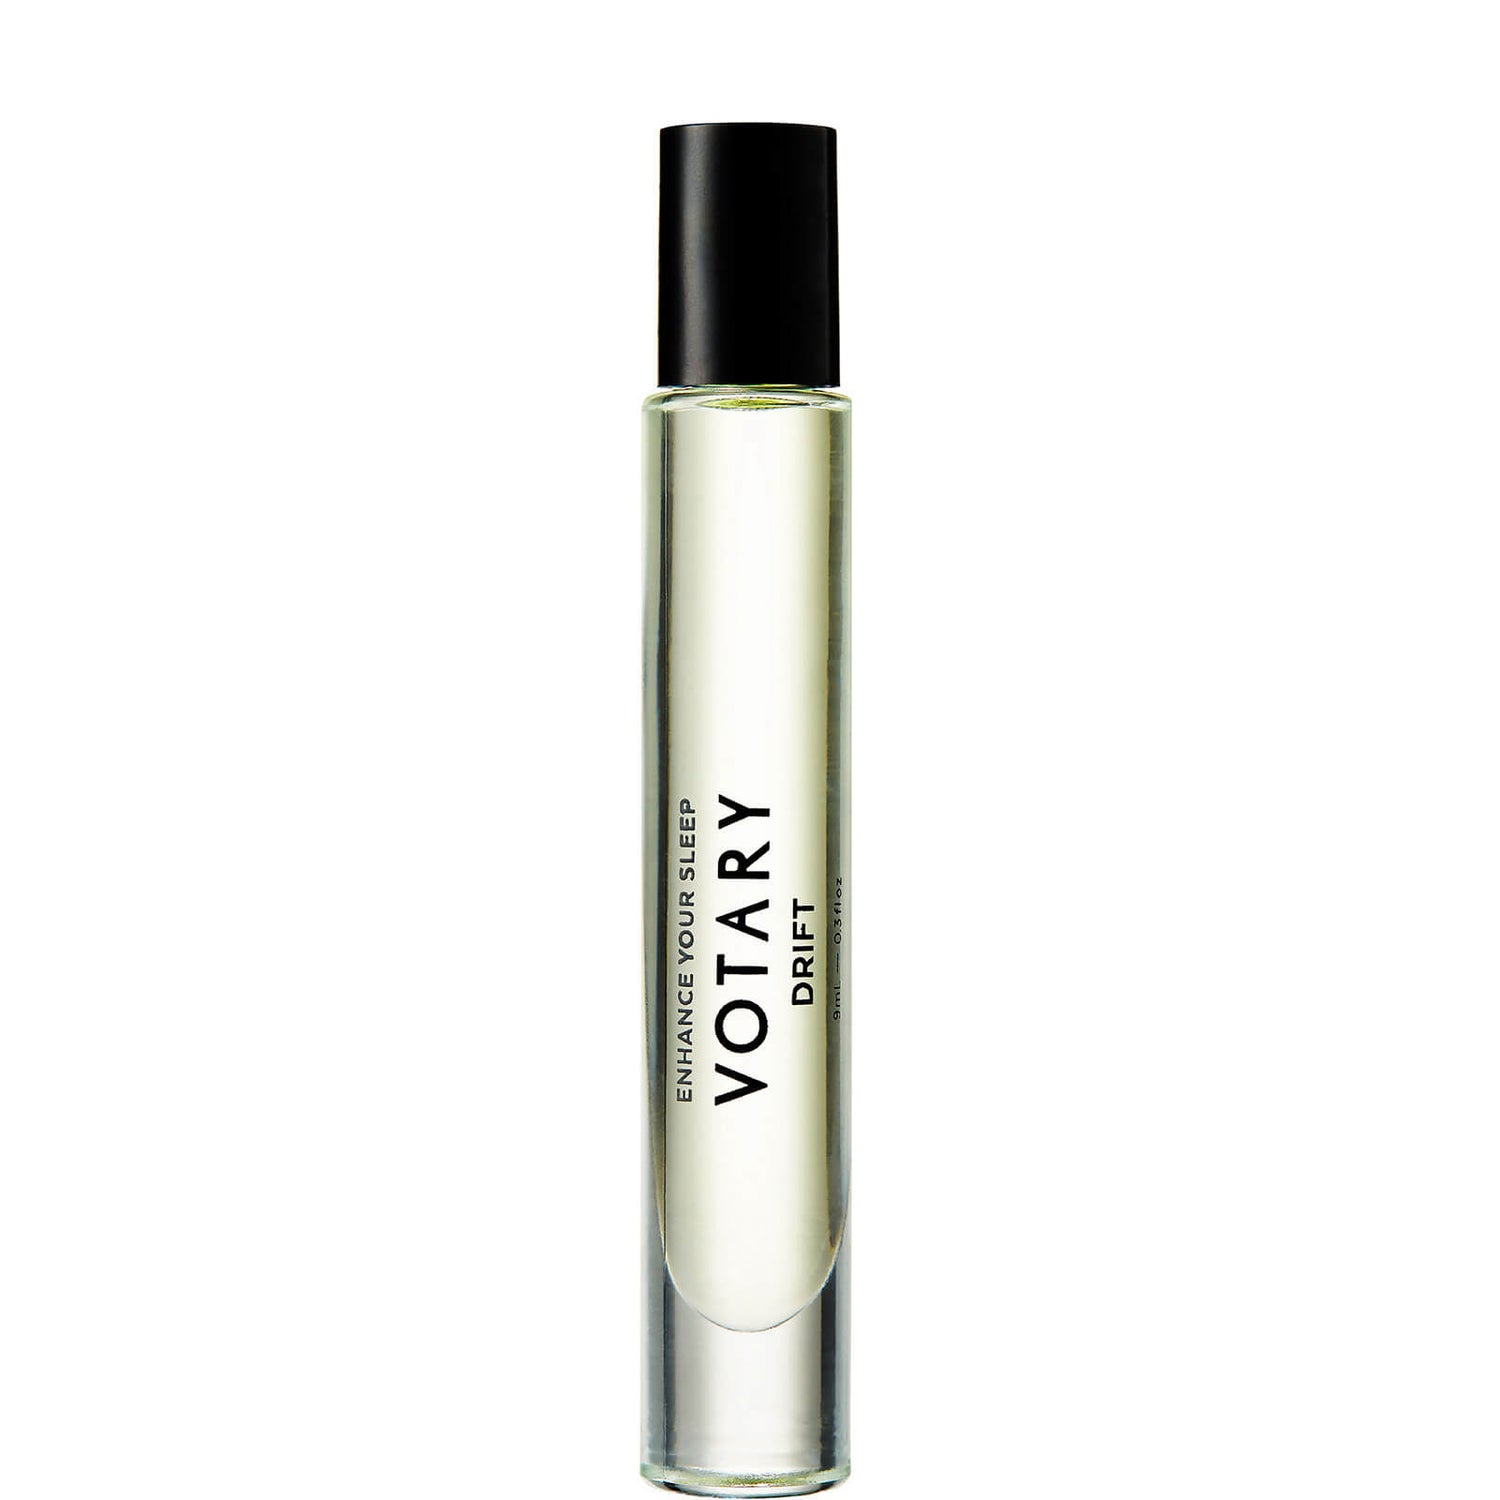 VOTARY Drift Aromatherapy Oil Roll-On | Cult Beauty